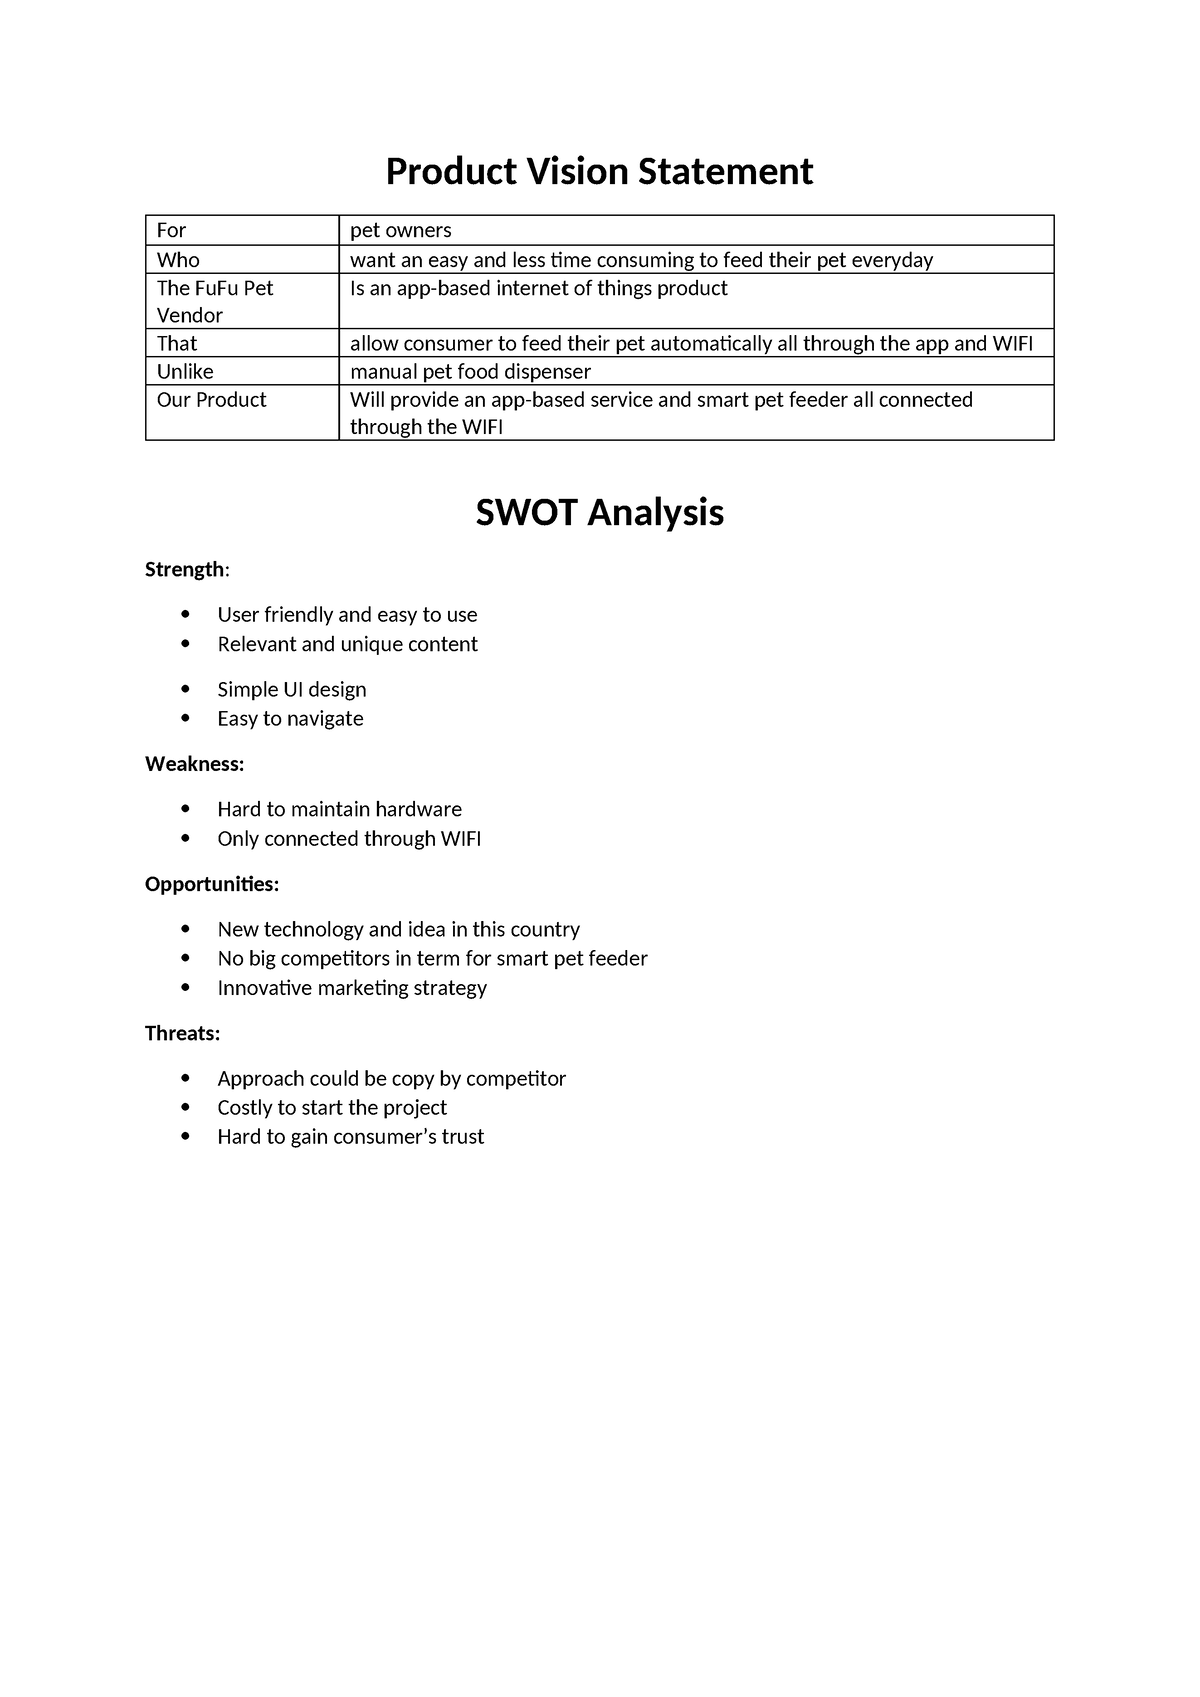 Product vision and swot - Product Vision Statement For pet owners Who ...